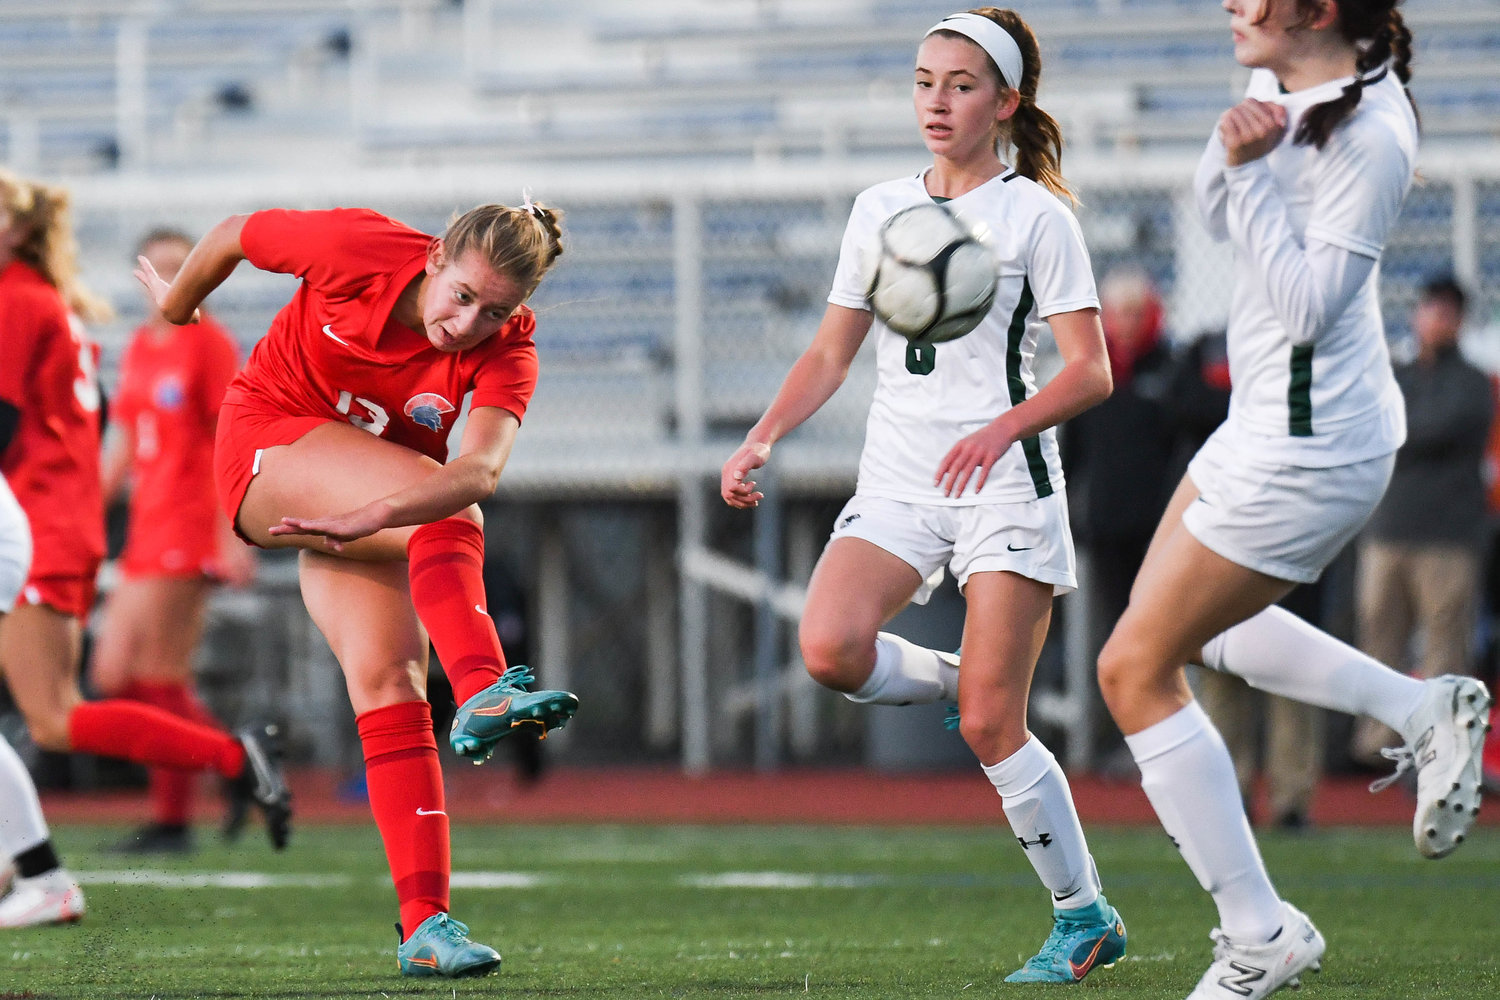 New Hartford’s Willa Pratt fires a shot toward goal against Fayetteville-Manlius on Monday night in New Hartford. Pratt scored and had two assists in the Spartans’ 4-0 non-league win. The victory pushed the defending Class A state champion’s unbeaten streak to 51 games.